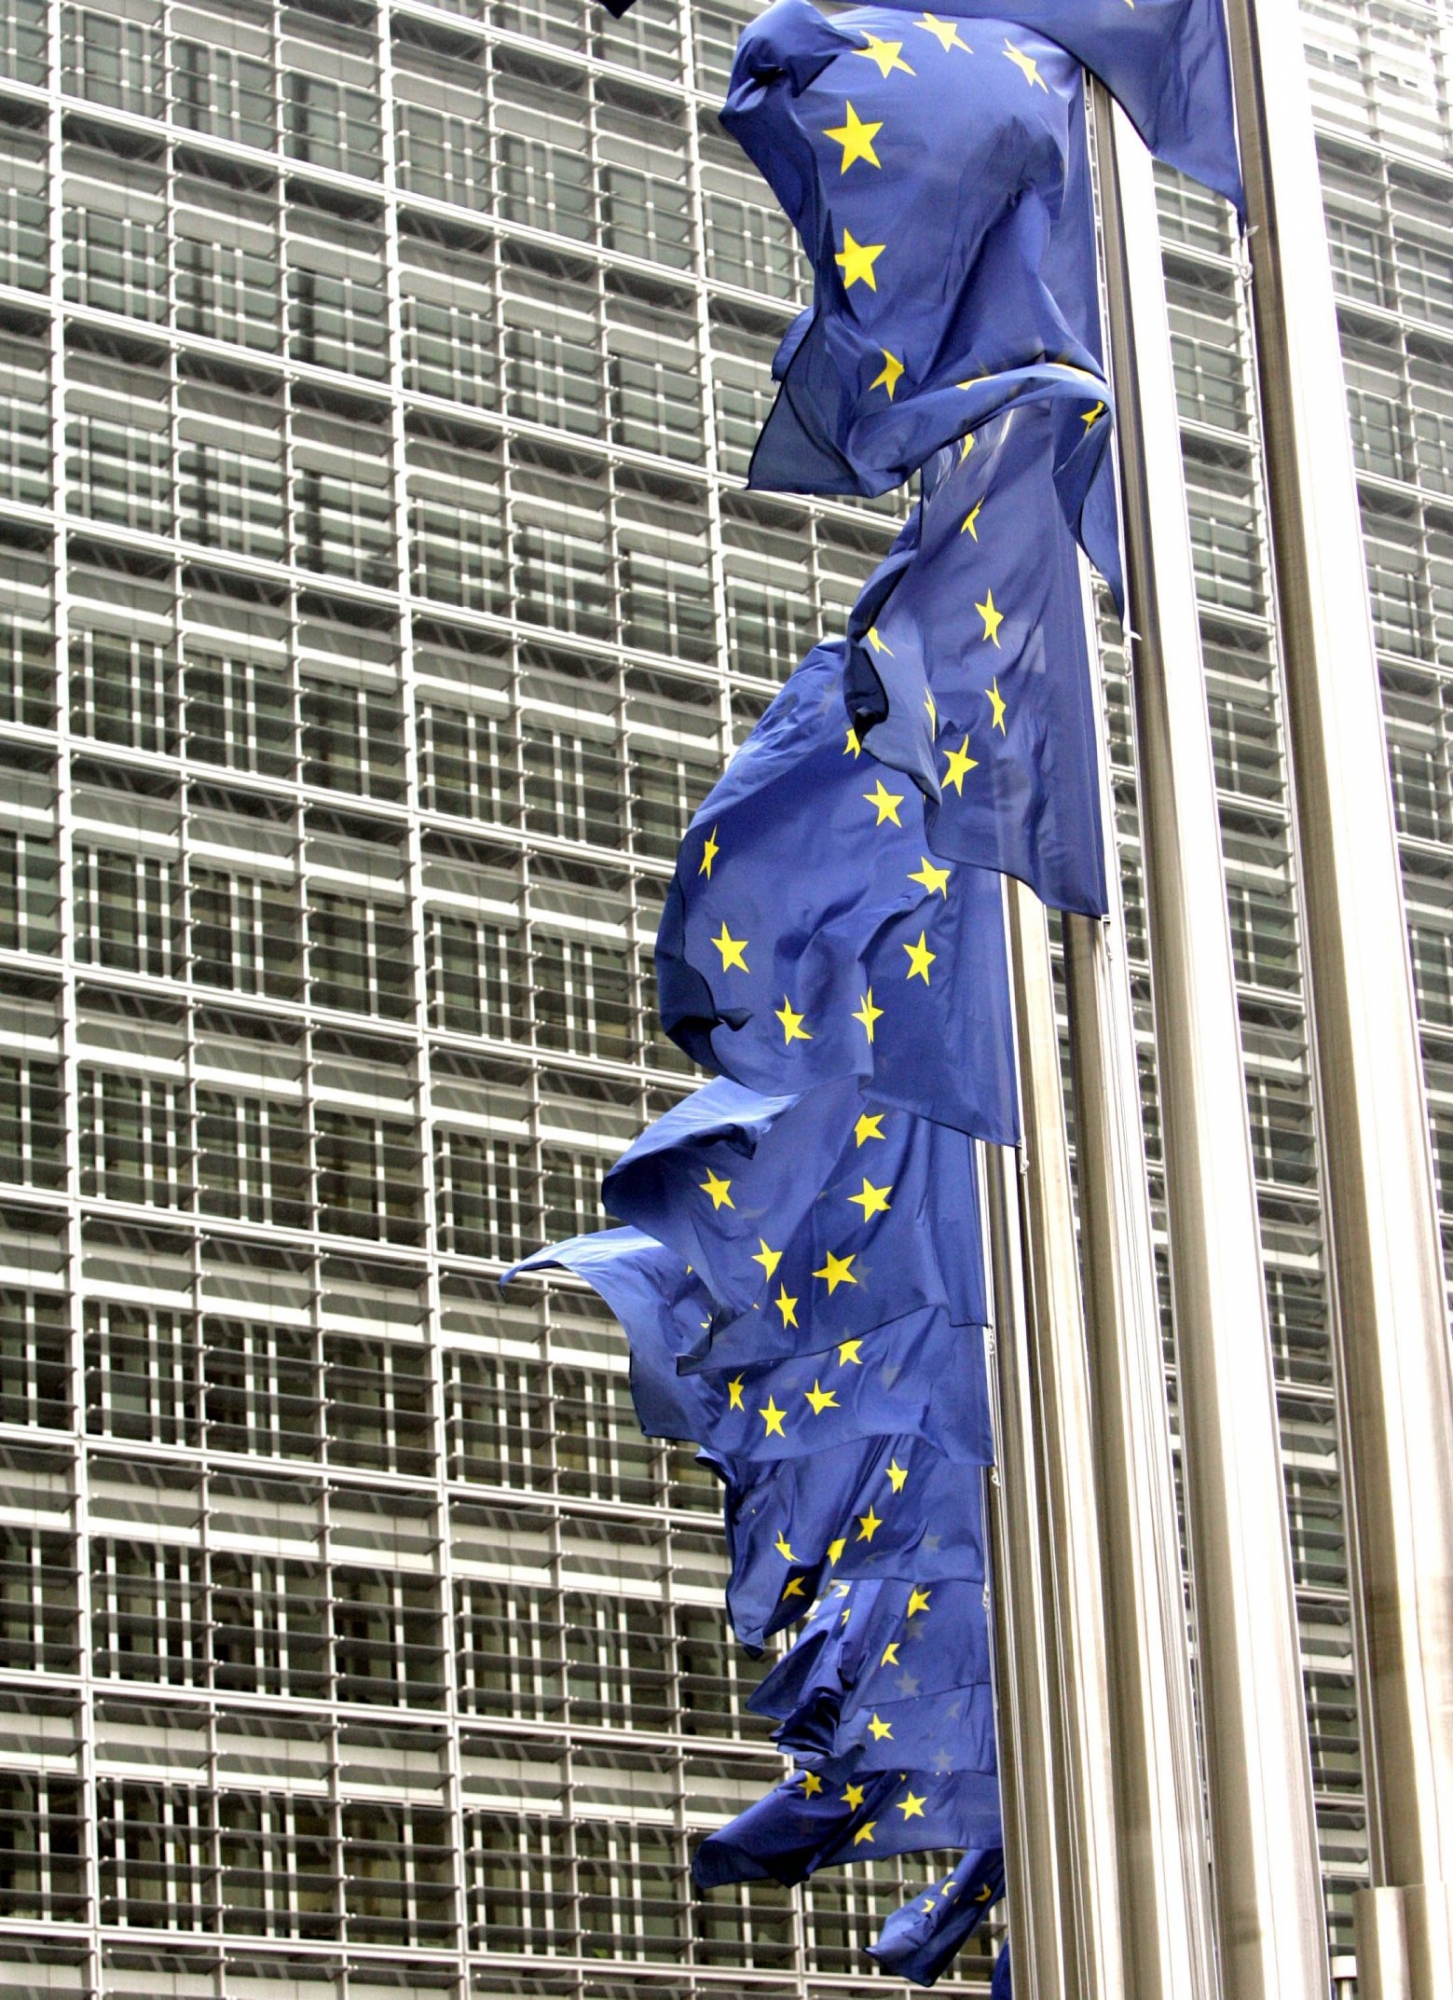 FILE In this Wednesday Nov. 8, 2006 file photo,  European Union flags wave in the wind outside EU headquarters in Brussels. The European Union has won the Nobel Peace Prize, it has been announced on Friday, Oct. 12, 2012.  (AP Photo/Virginia Mayo, File) BELGIEN EU PARLAMENT BRUESSEL